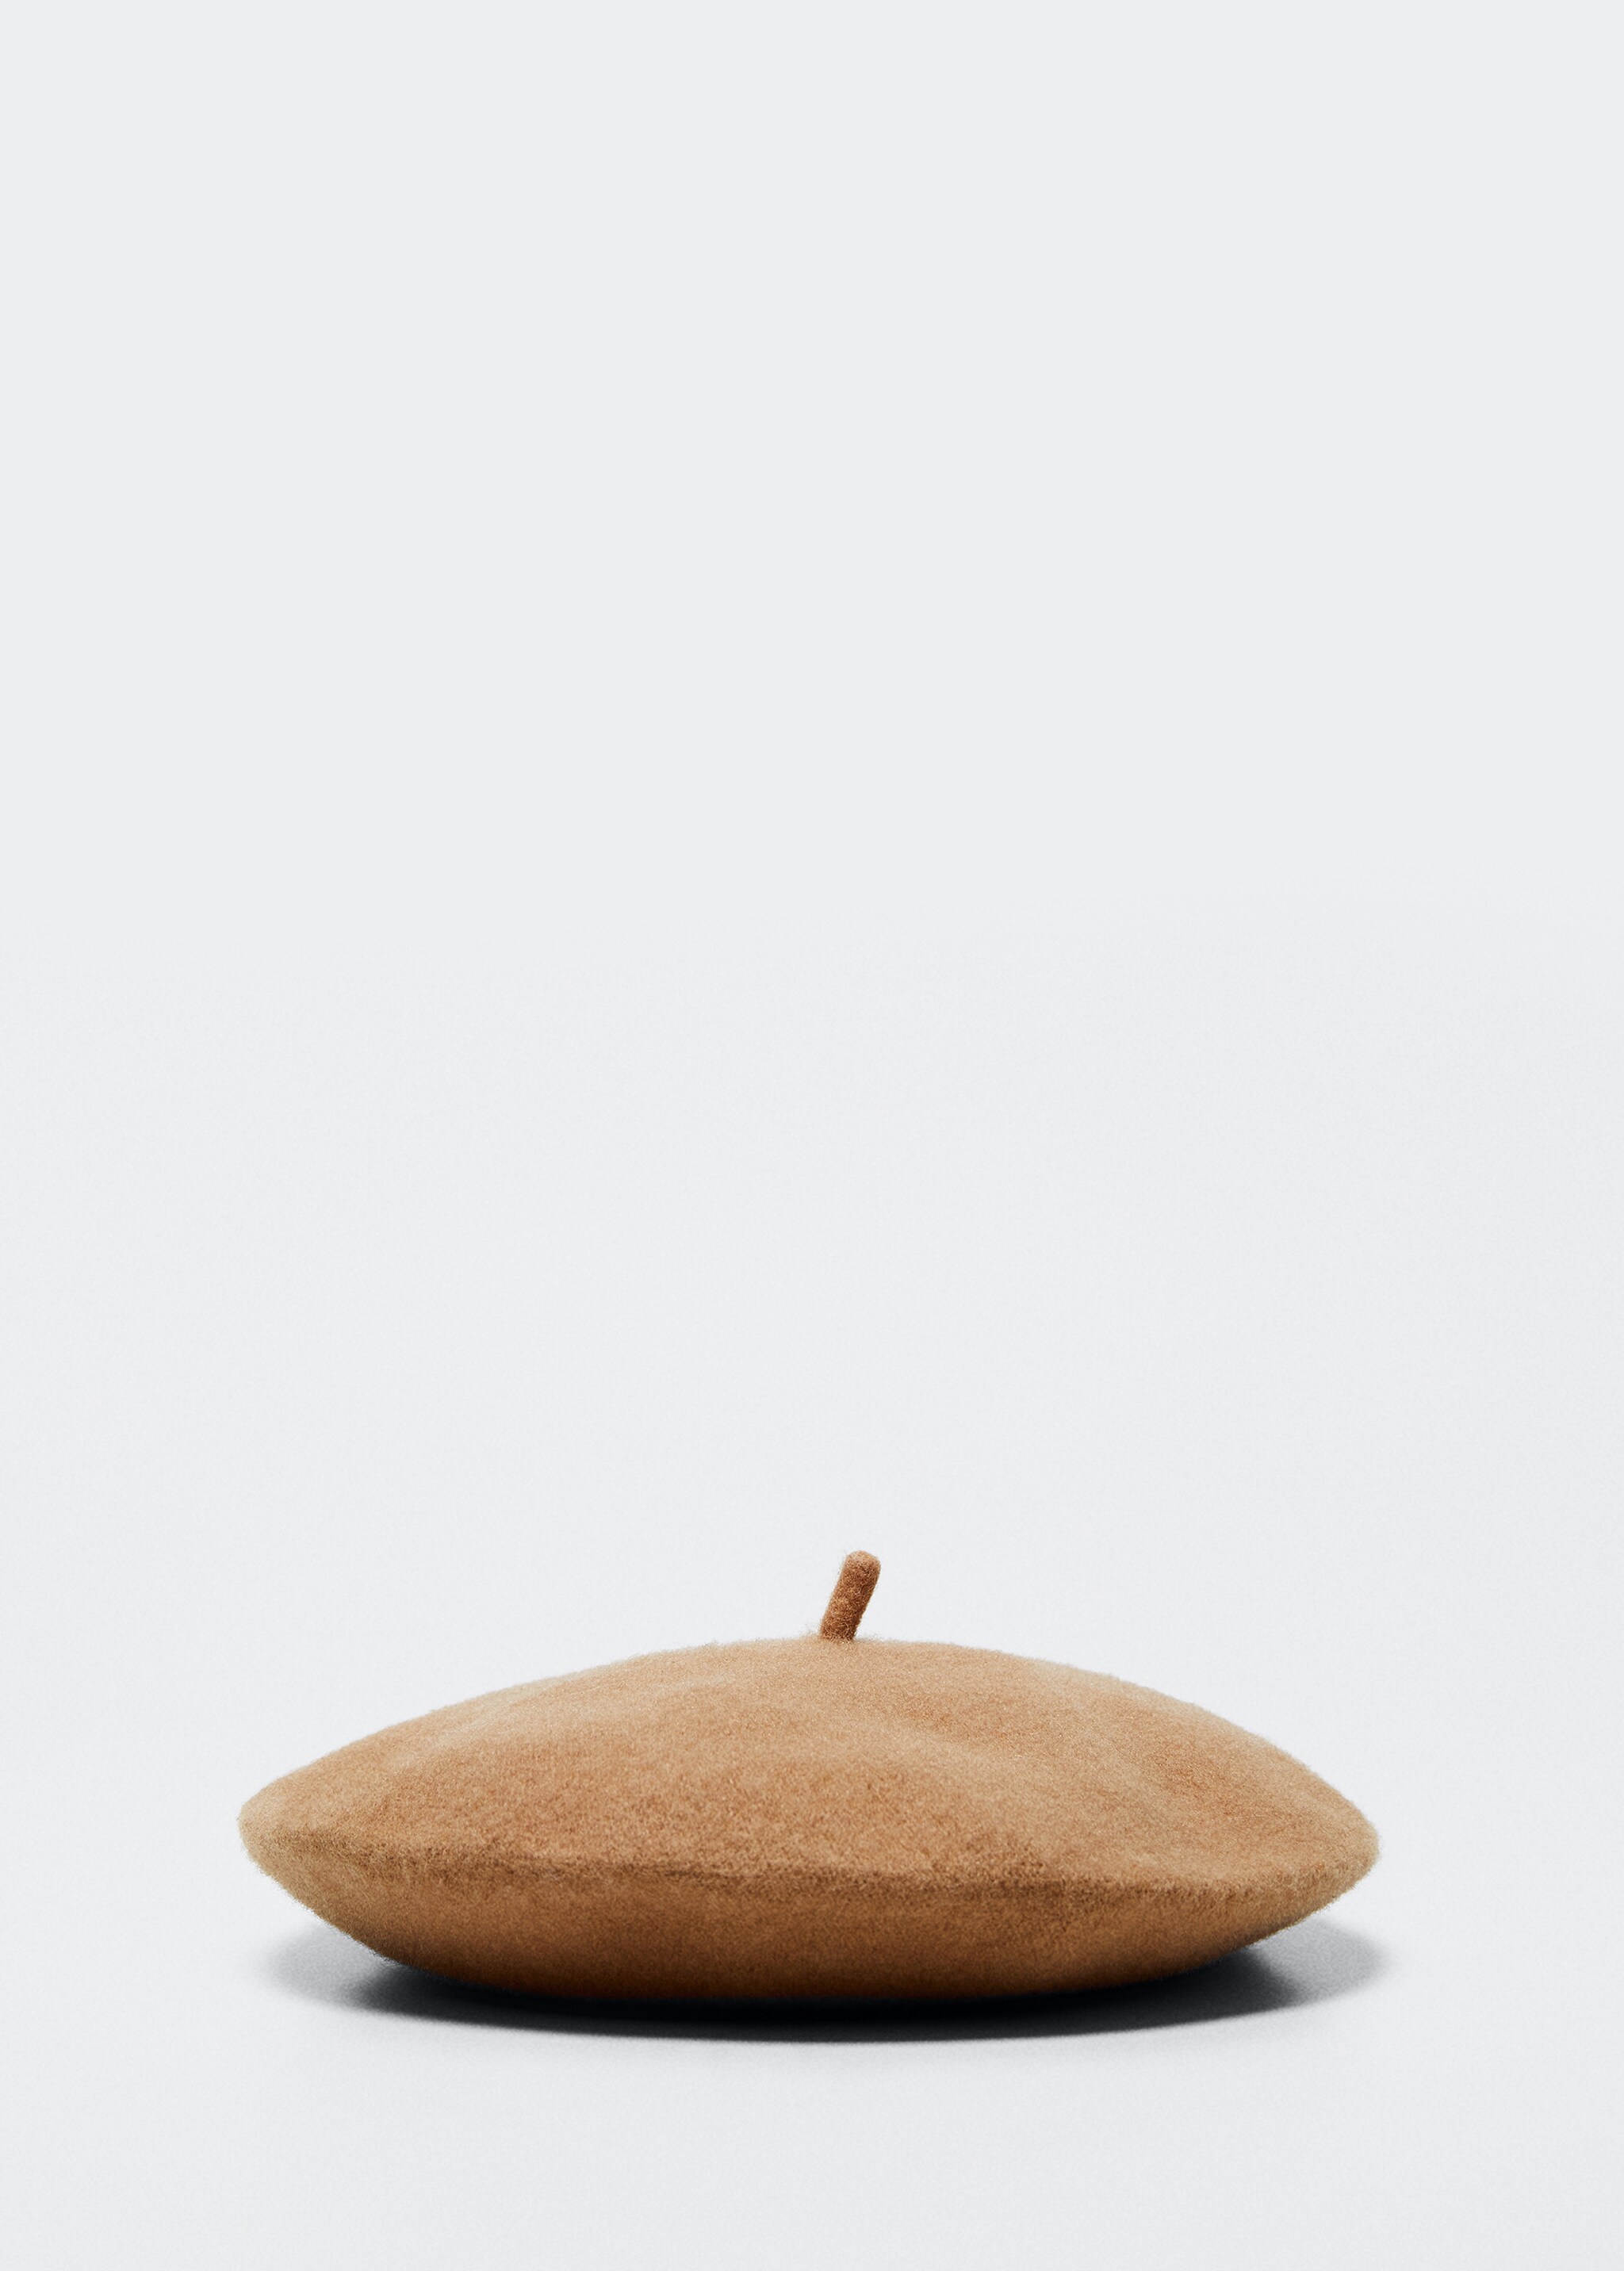 Wool beret - Article without model